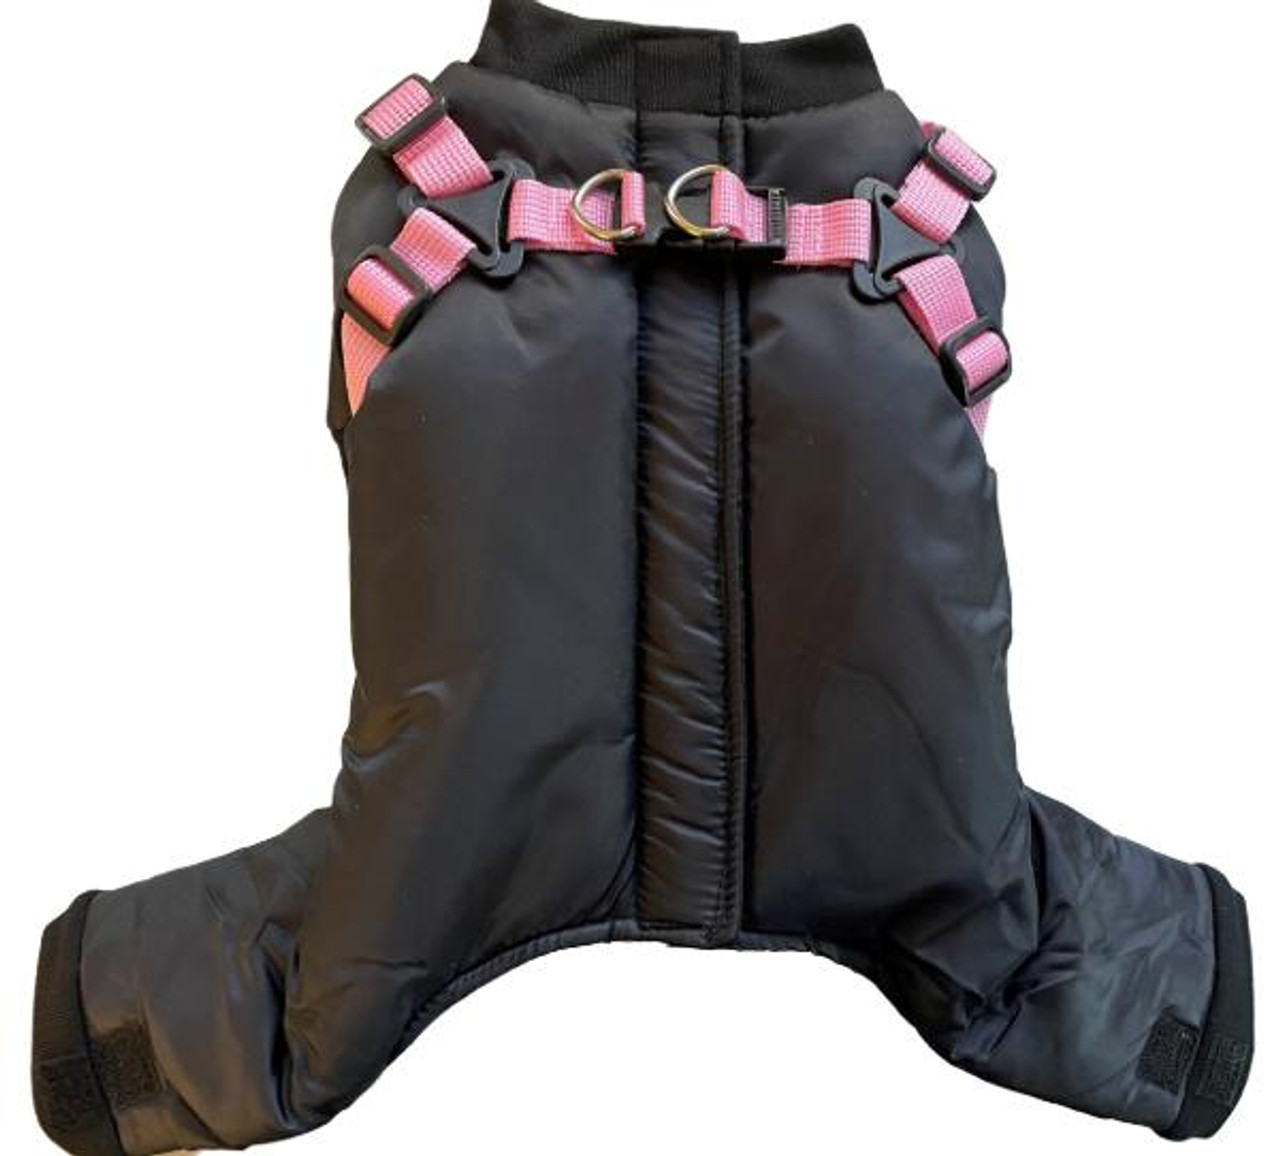  NYD Harness Snowsuit 